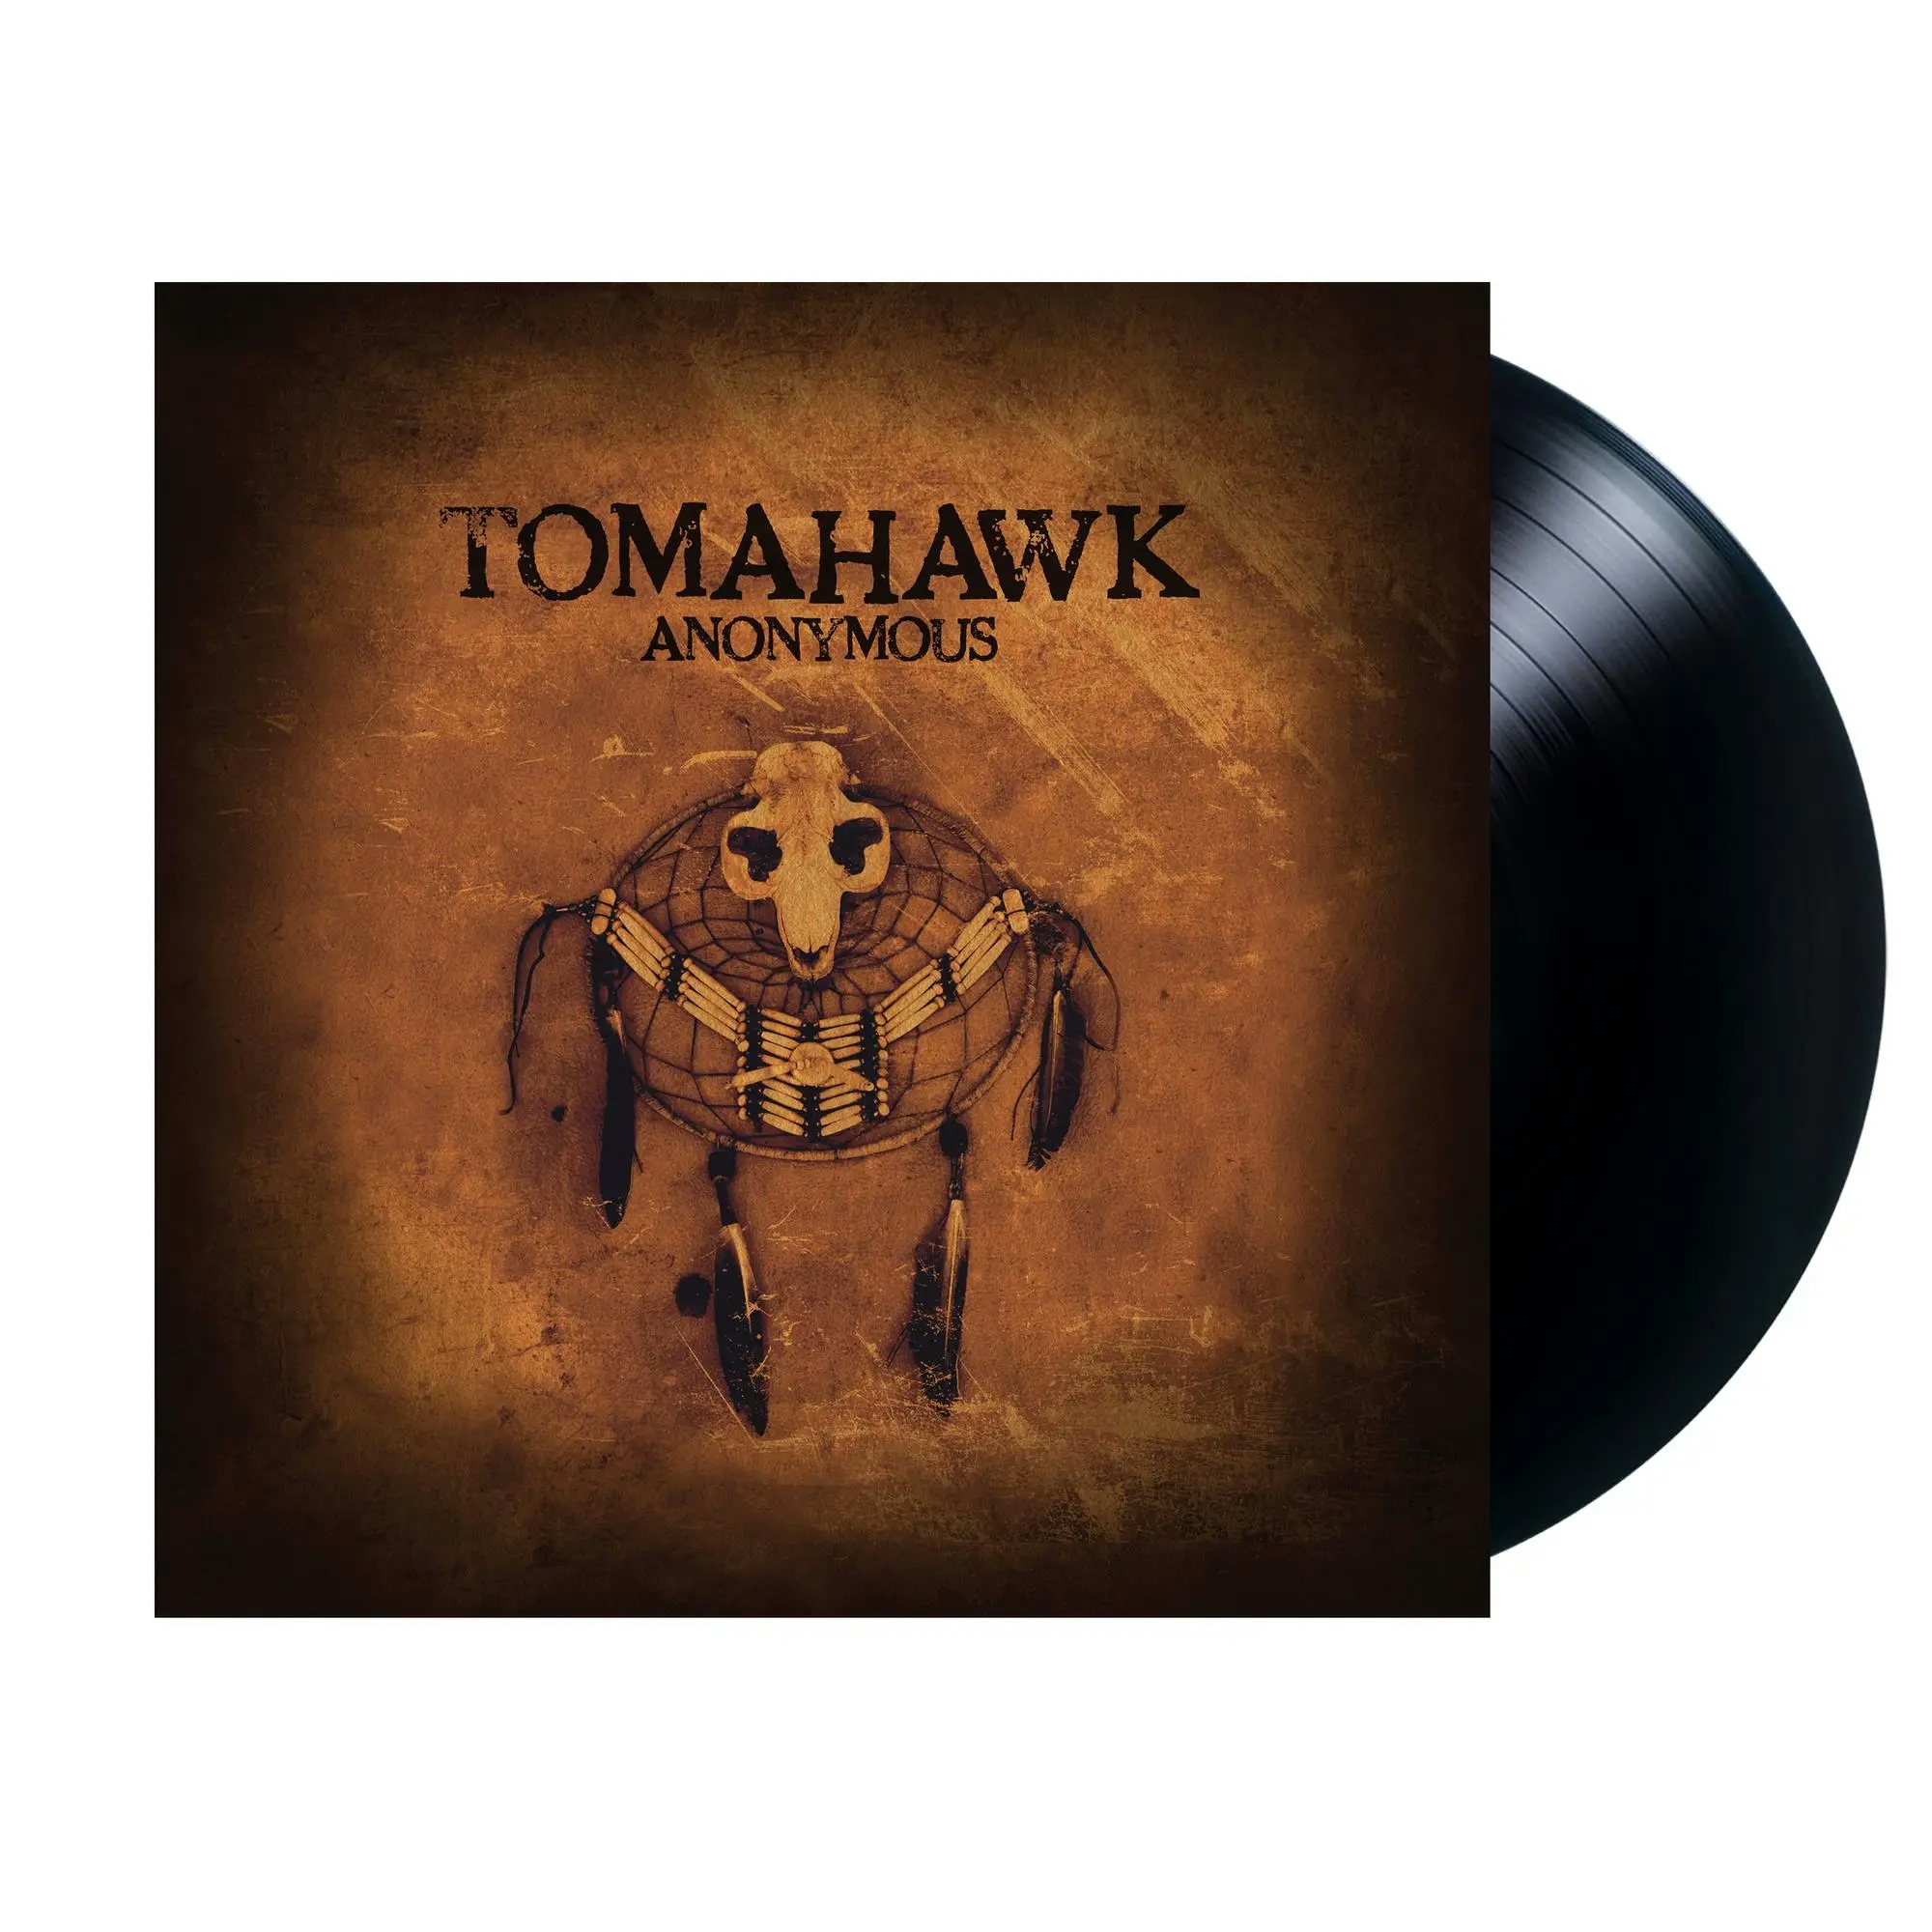 Album artwork for Anonymous by Tomahawk